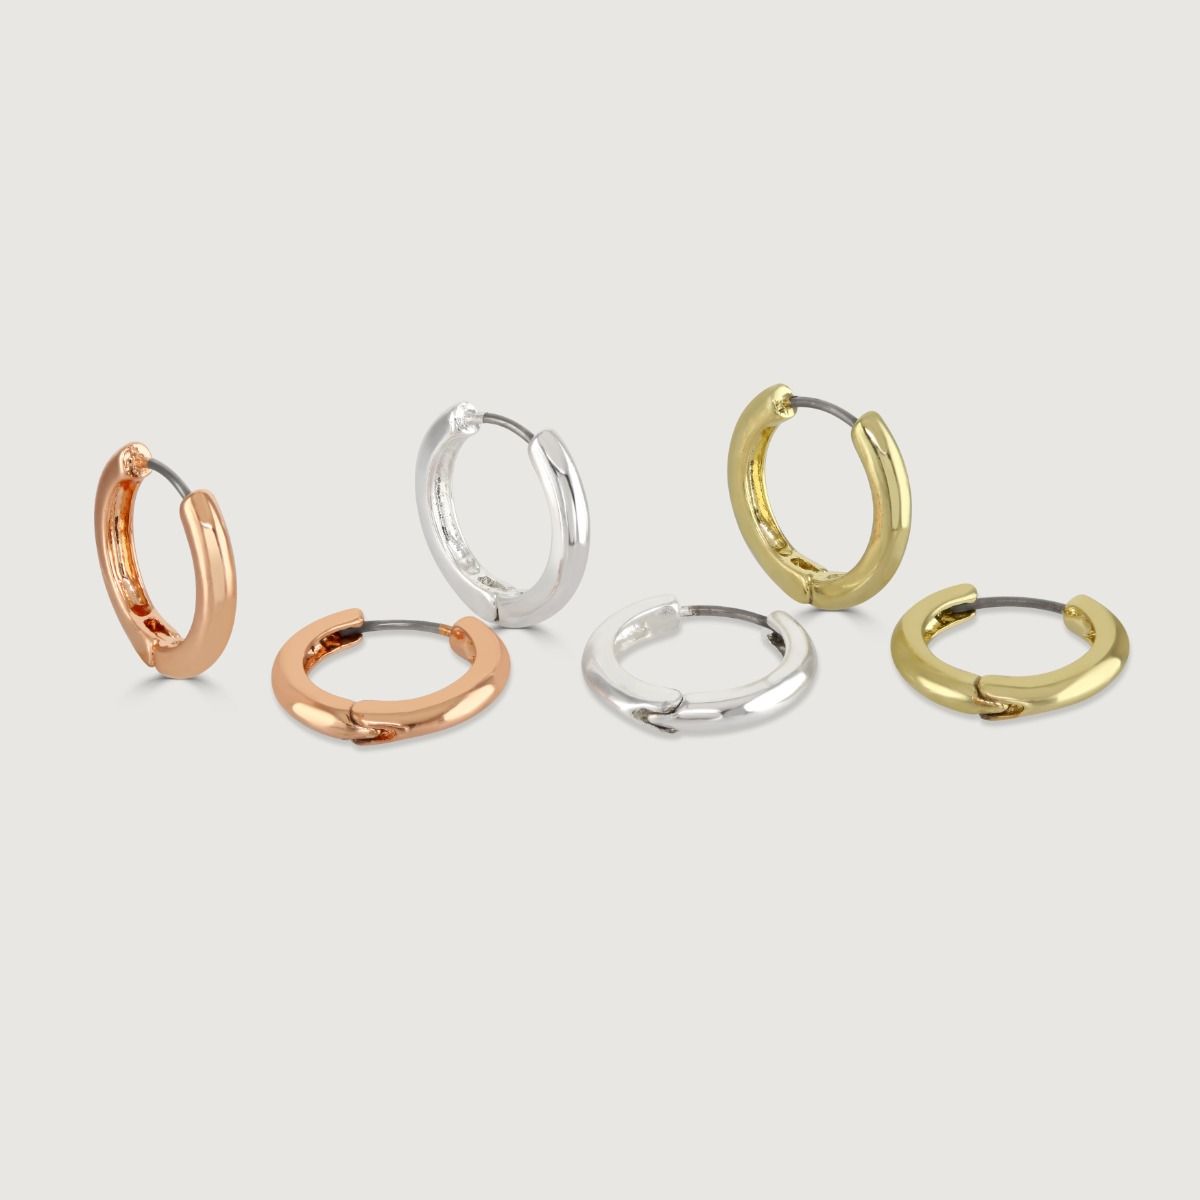 The Set of 3 Hoop Earrings offers versatility and style in one package. With three different metallic tones to choose from, these hoop earrings allow you to mix and match or wear them individually. Effortlessly elevate your look with this set, perfect for